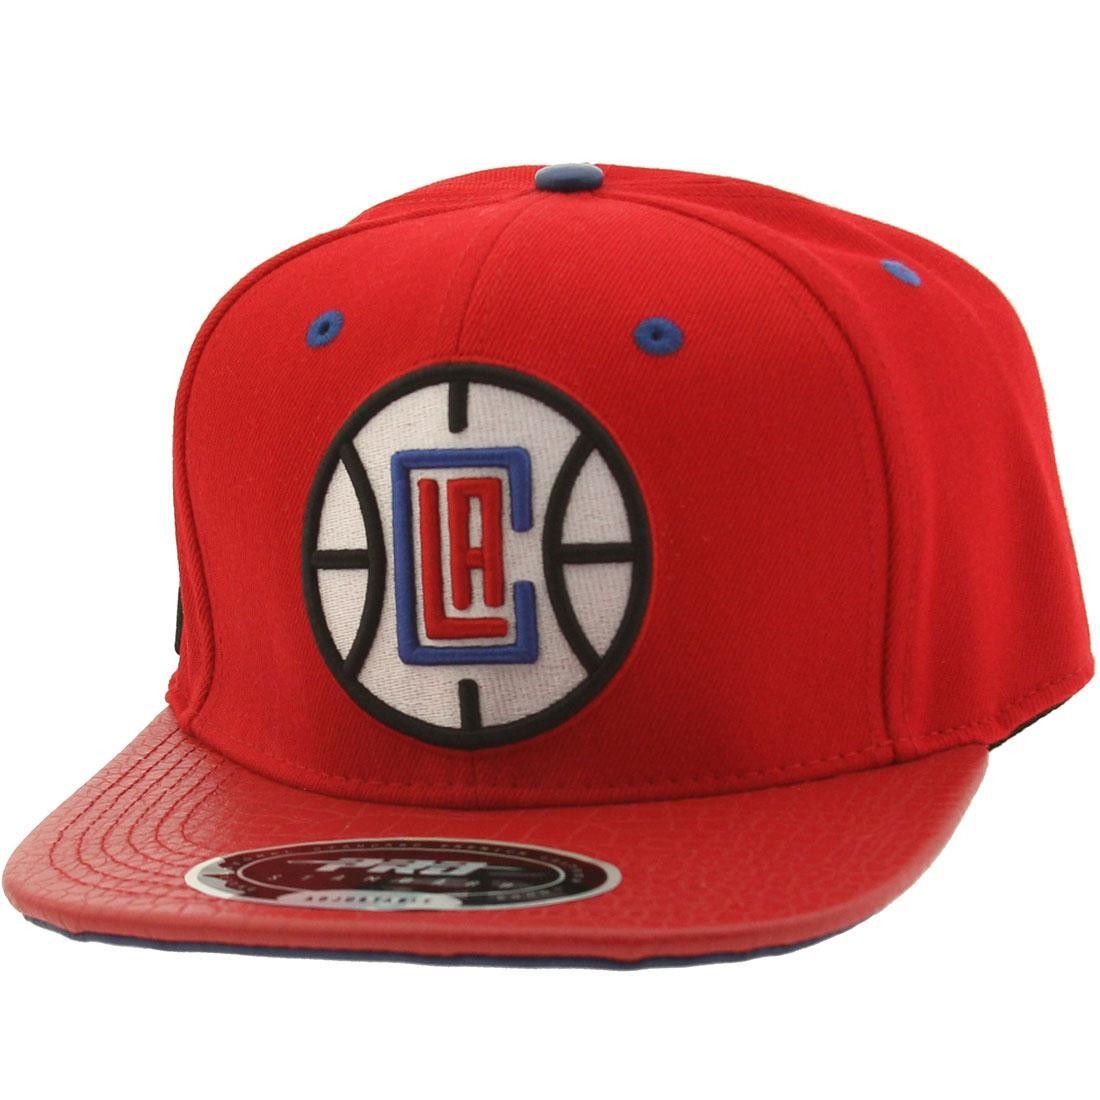 Los Angeles Clippers Snapback Hat New Era 9FIFTY Adjustable Youth Cap NBA